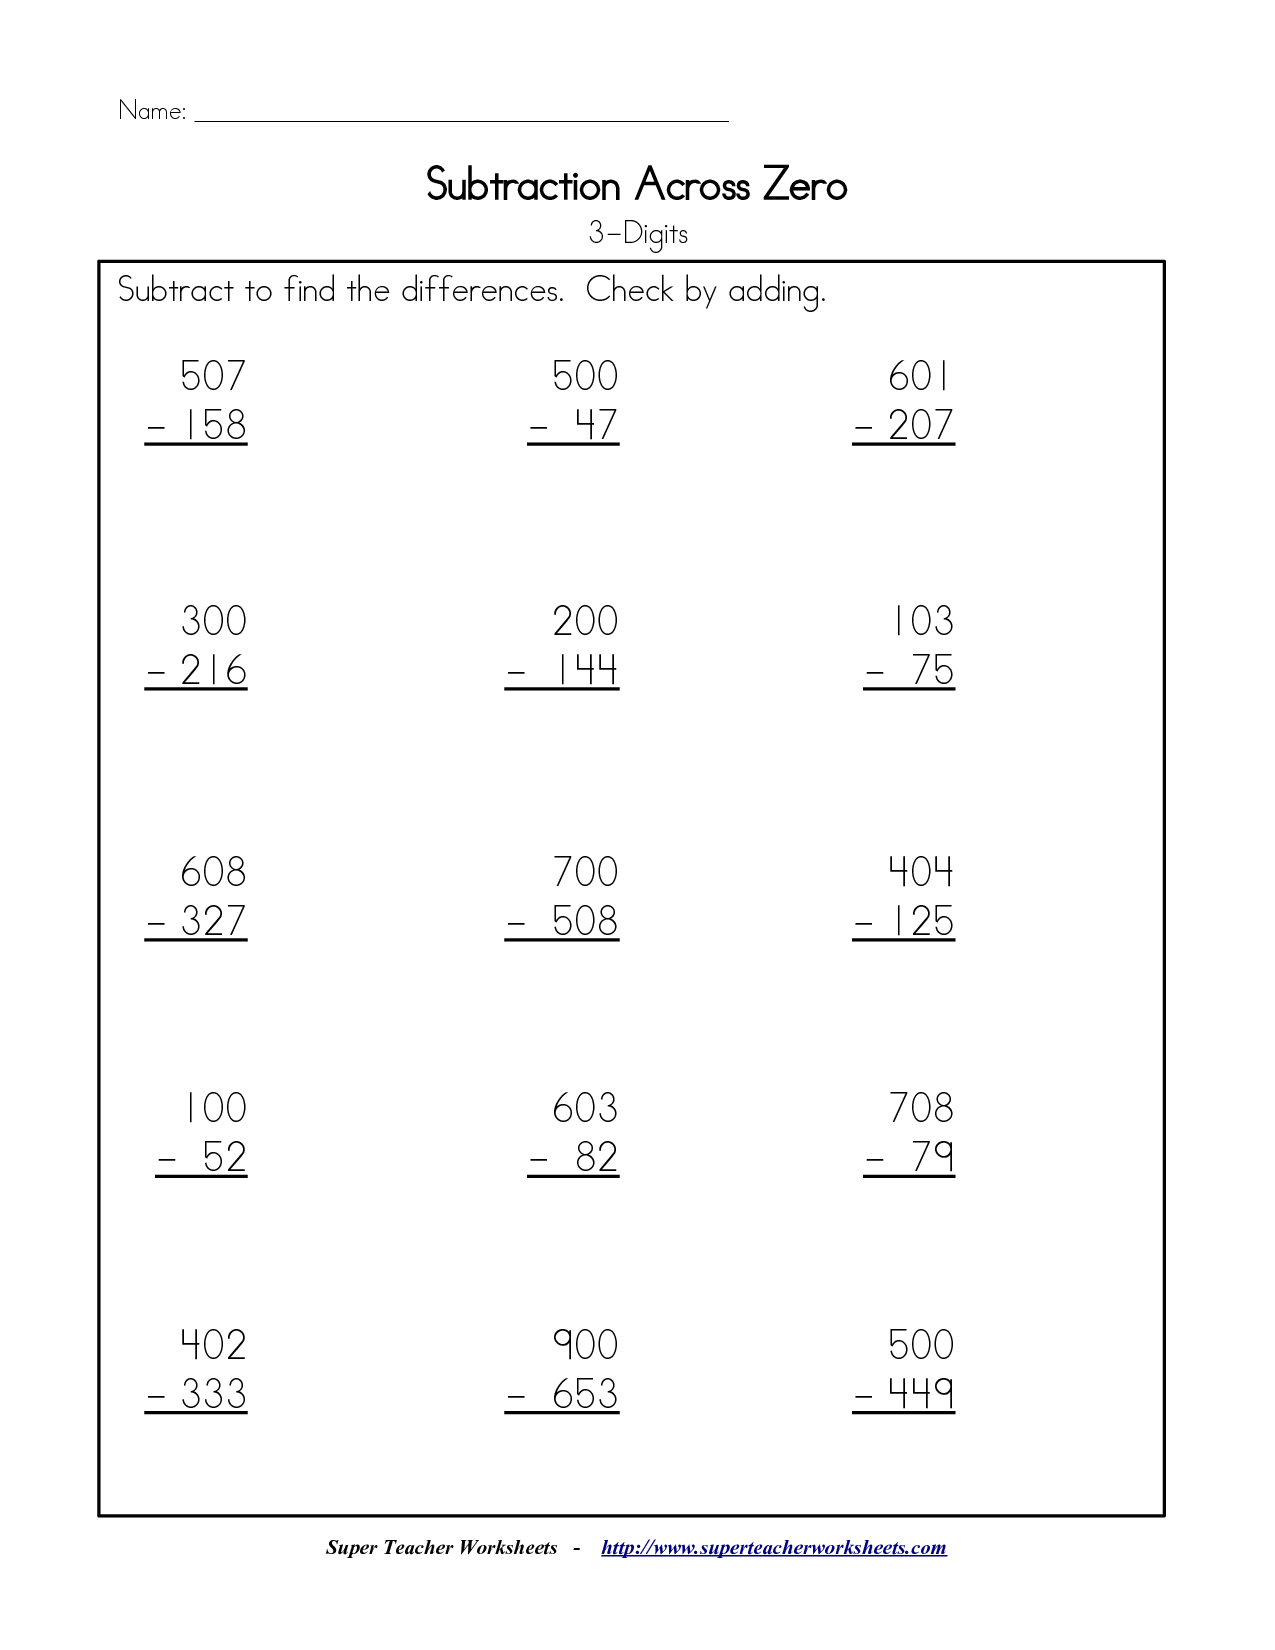 free-super-teacher-worksheets-math-counting-coins-you-will-get-to-know-what-s-new-in-our